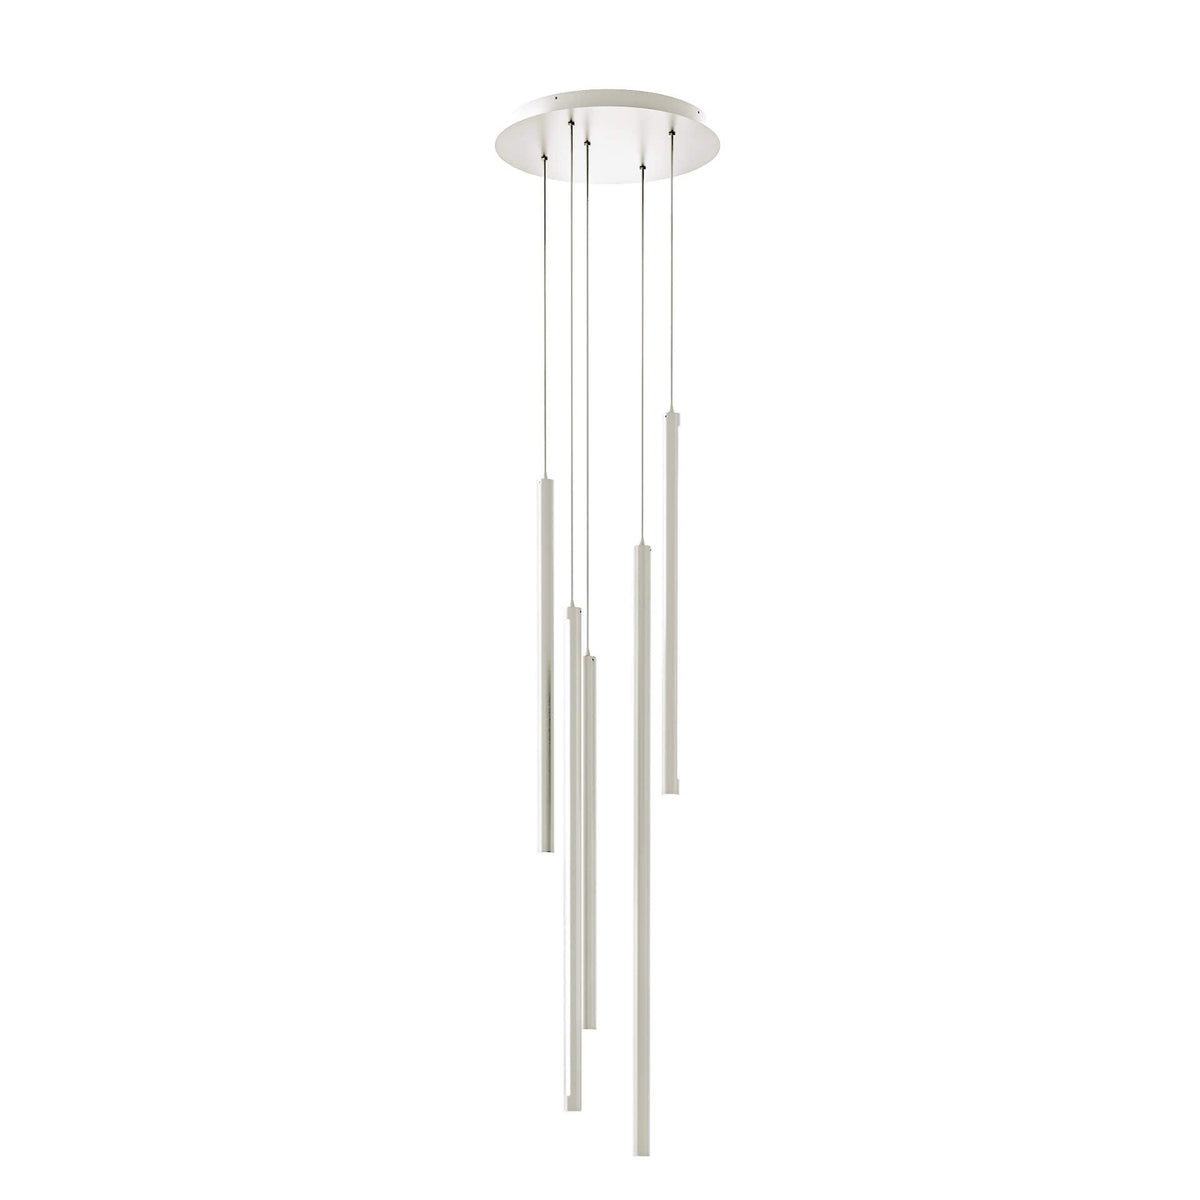 Dals Lighting - PDLED Round CCT LED Duo-Light Cylinder Pendant Cluster - PDLED120-5-WH | Montreal Lighting & Hardware